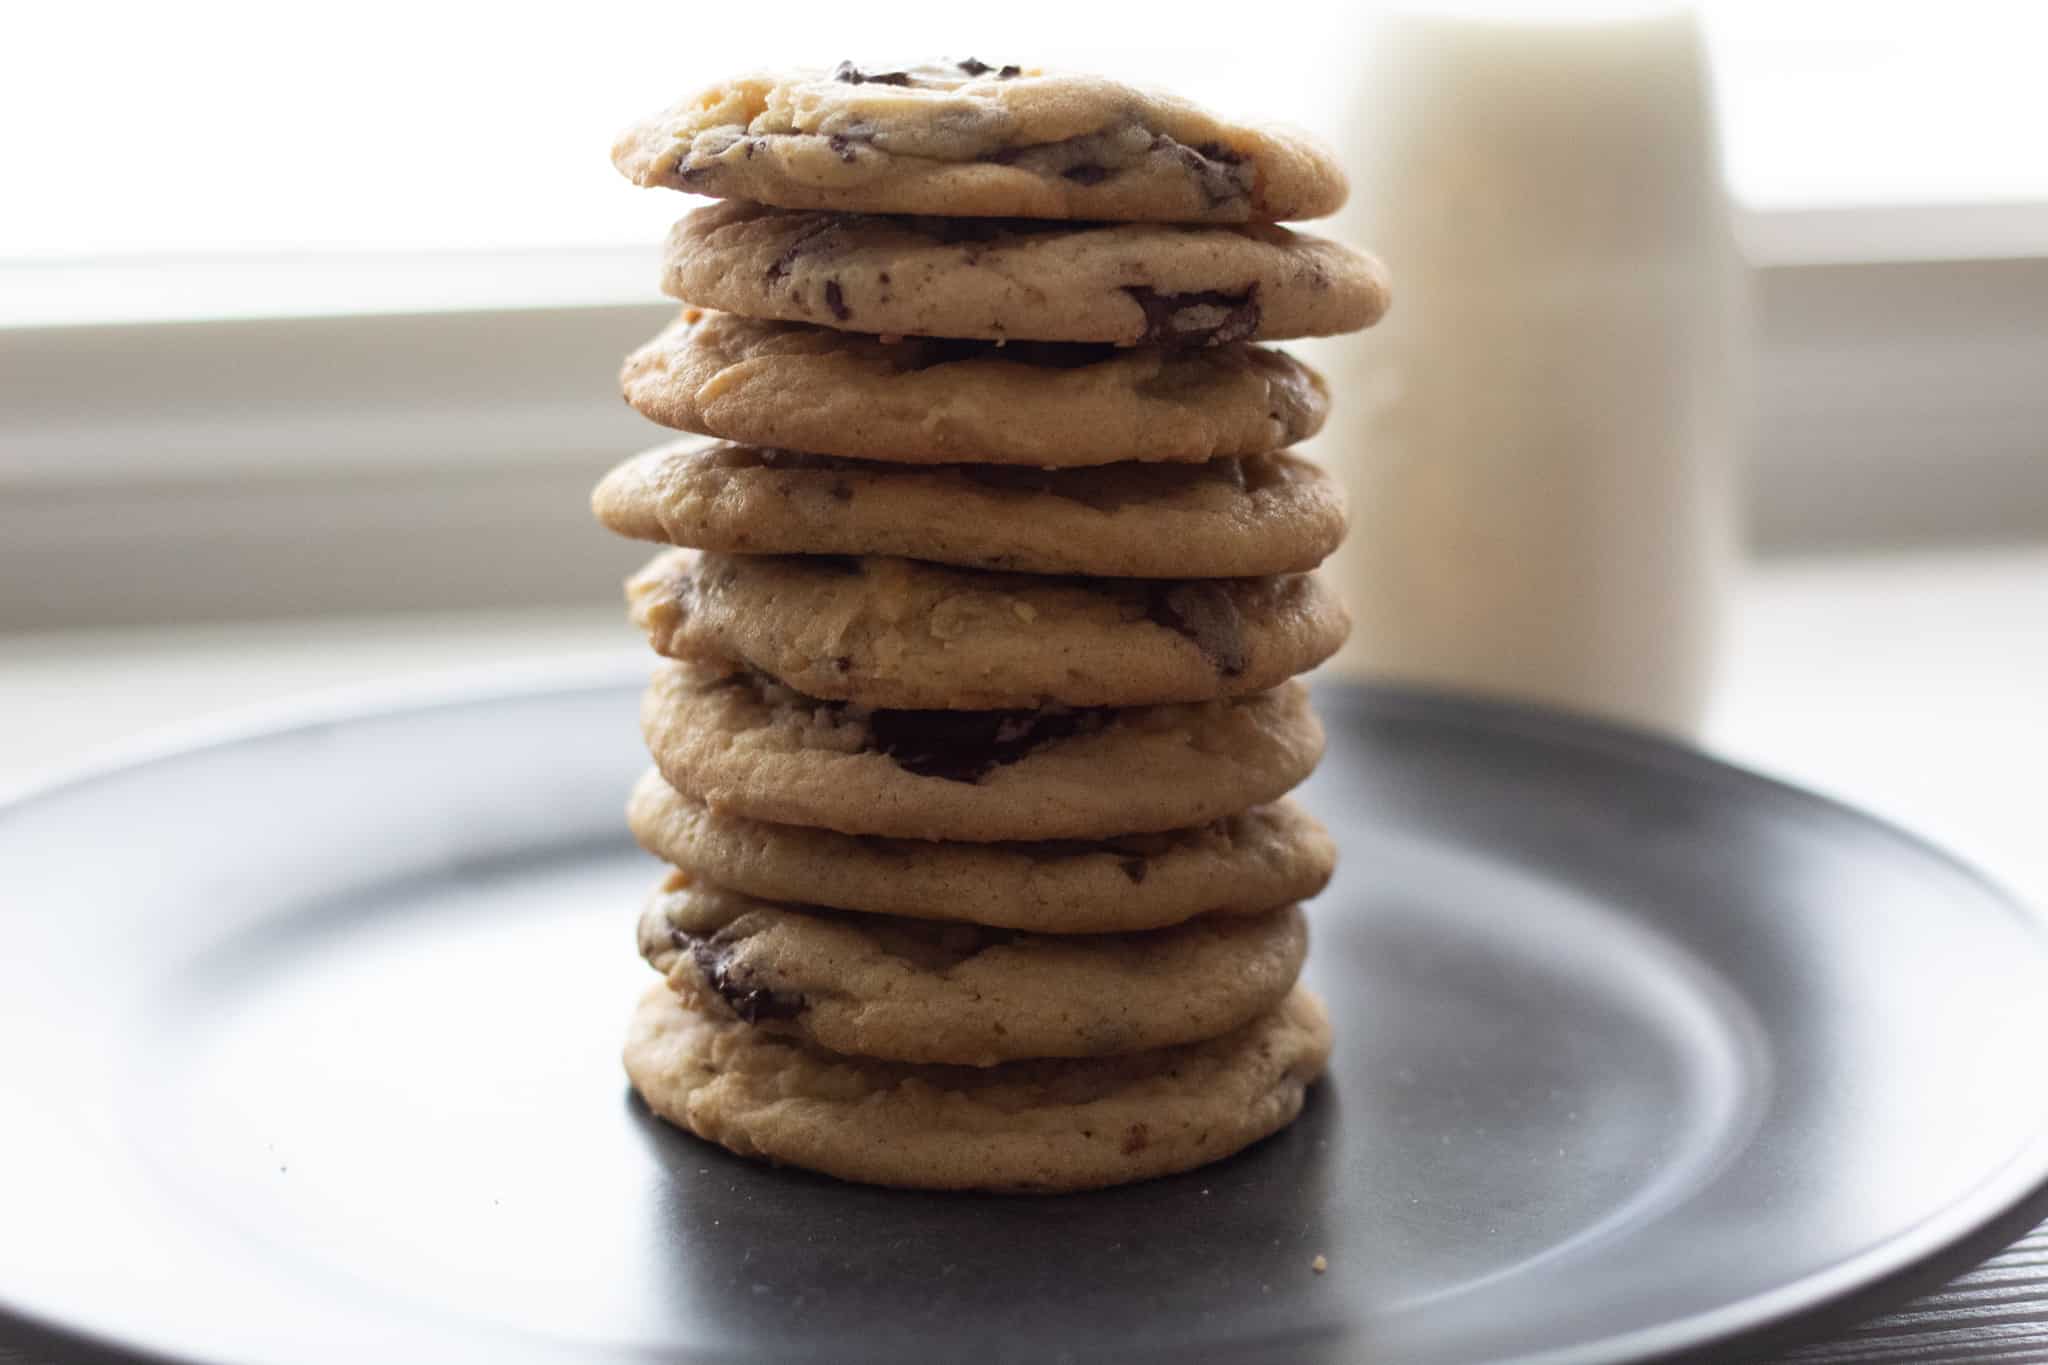 Stack of chocolate chunk cookies on a dark plate with milk in the background